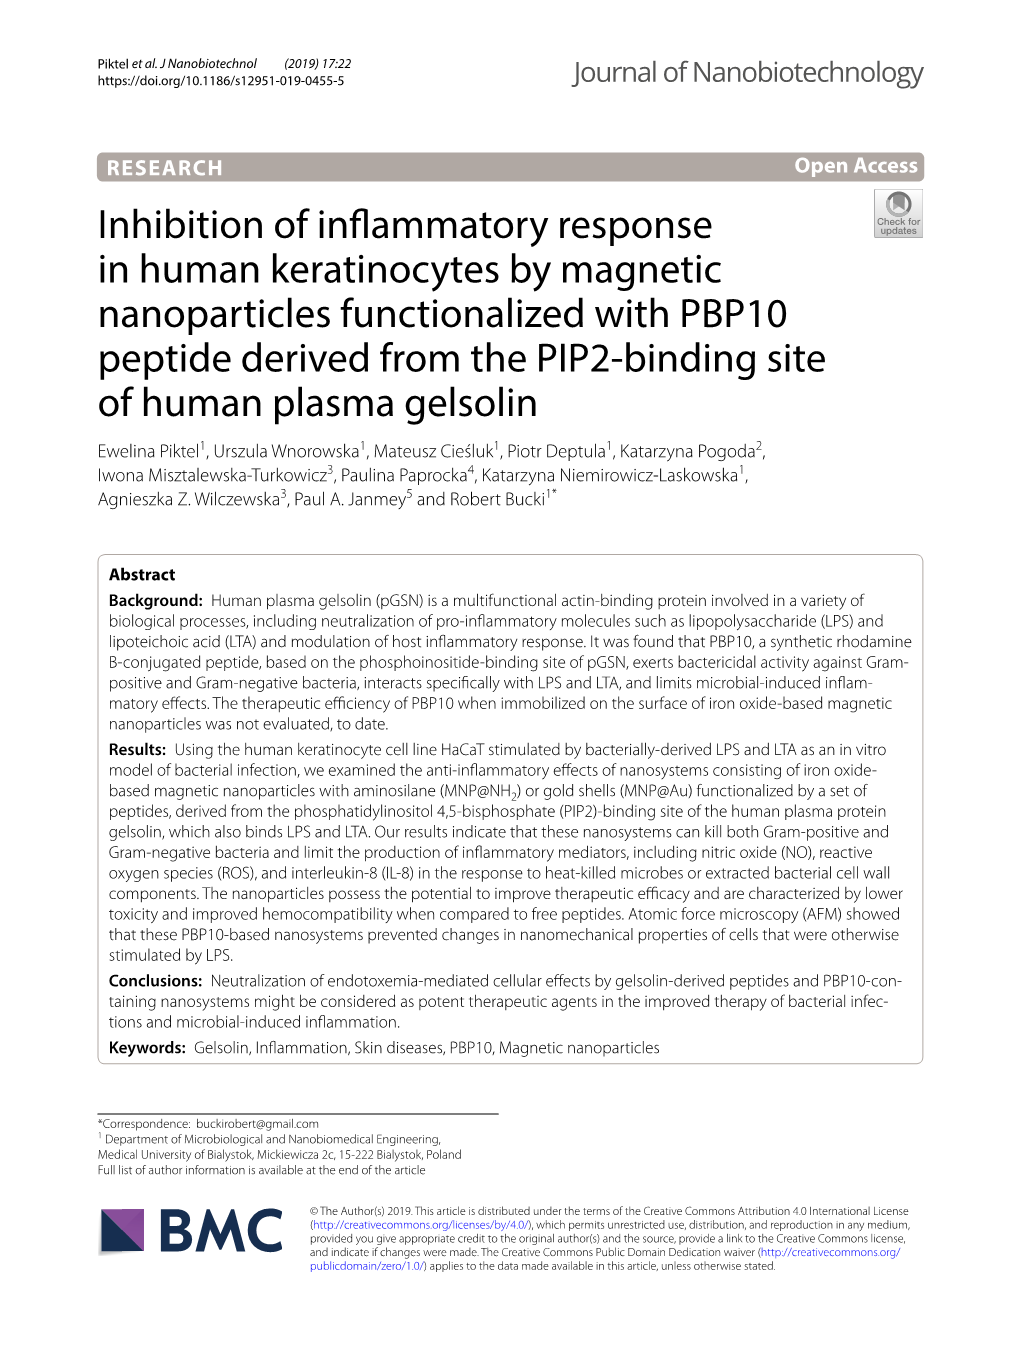 Inhibition of Inflammatory Response in Human Keratinocytes by Magnetic Nanoparticles Functionalized with PBP10 Peptide Derived F